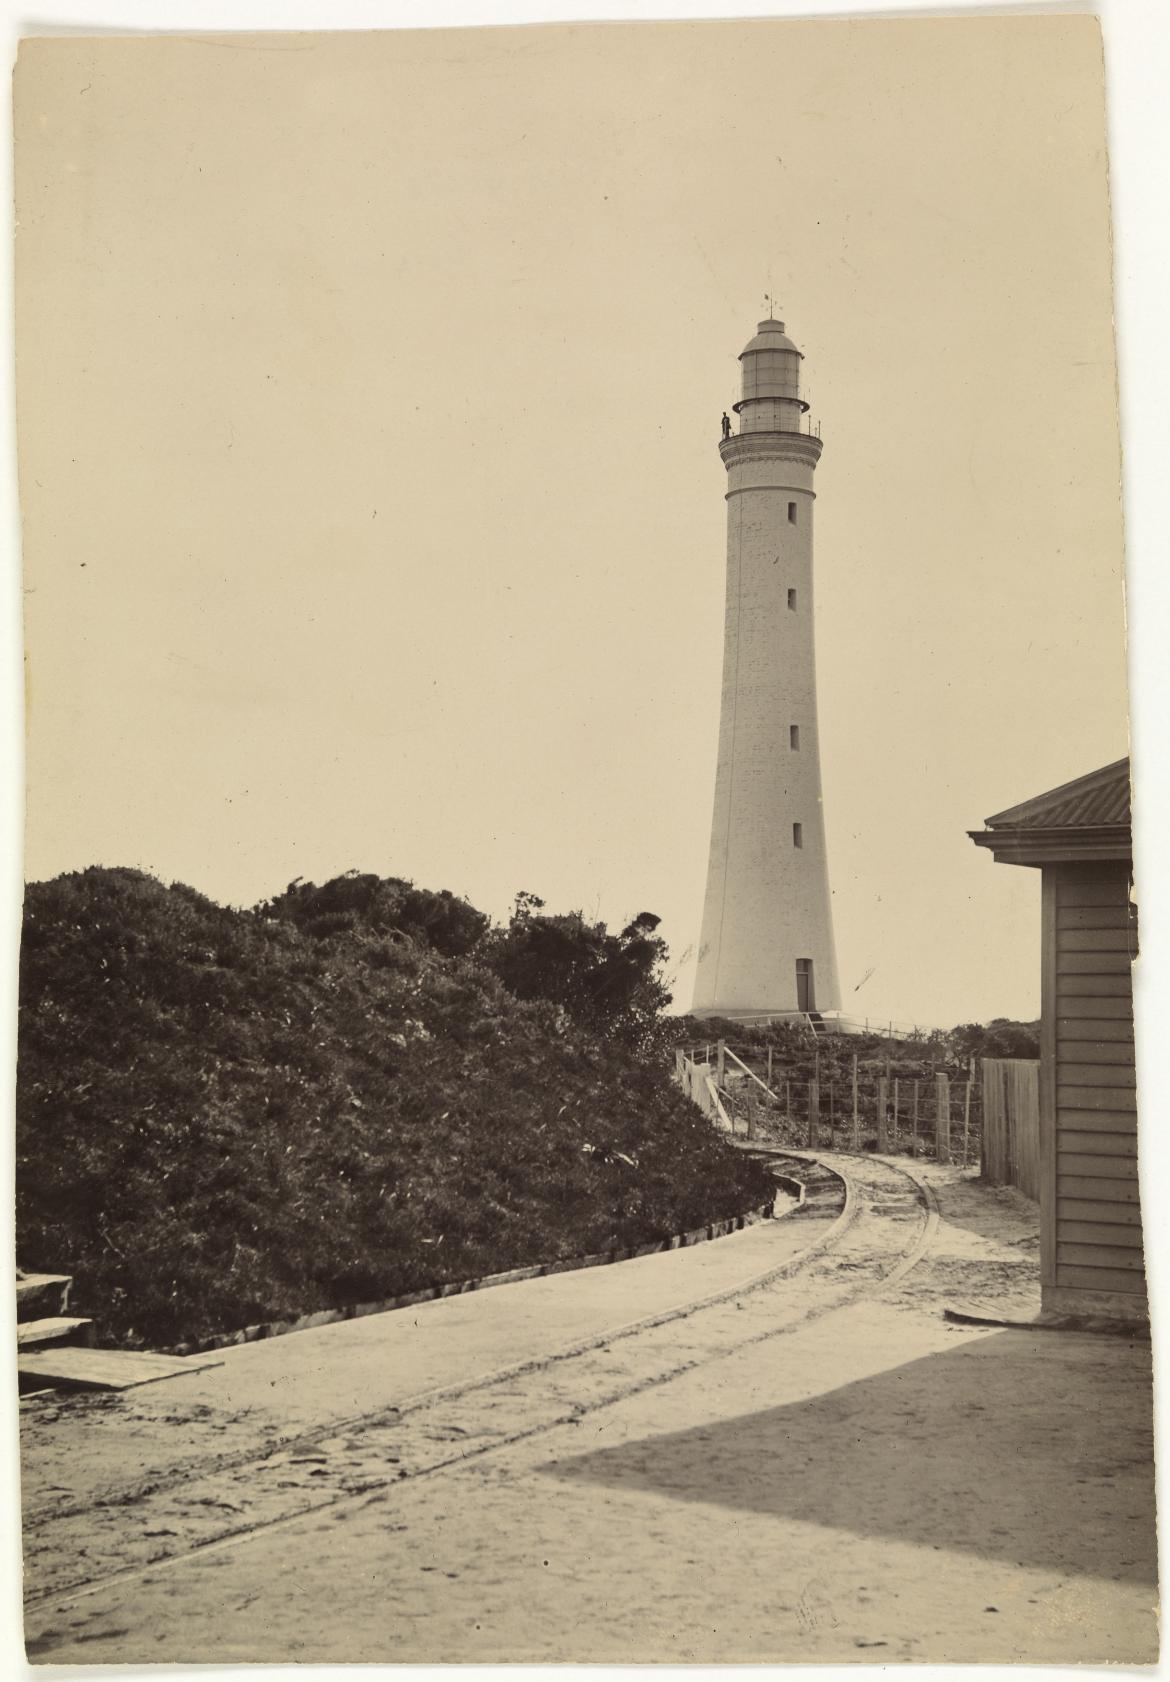 Figure 13. Sorell Light, Macquarie Harbour c. 1910 (Digitised item from: W.L. Crowther Library, Tasmanian Archive and Heritage Office)